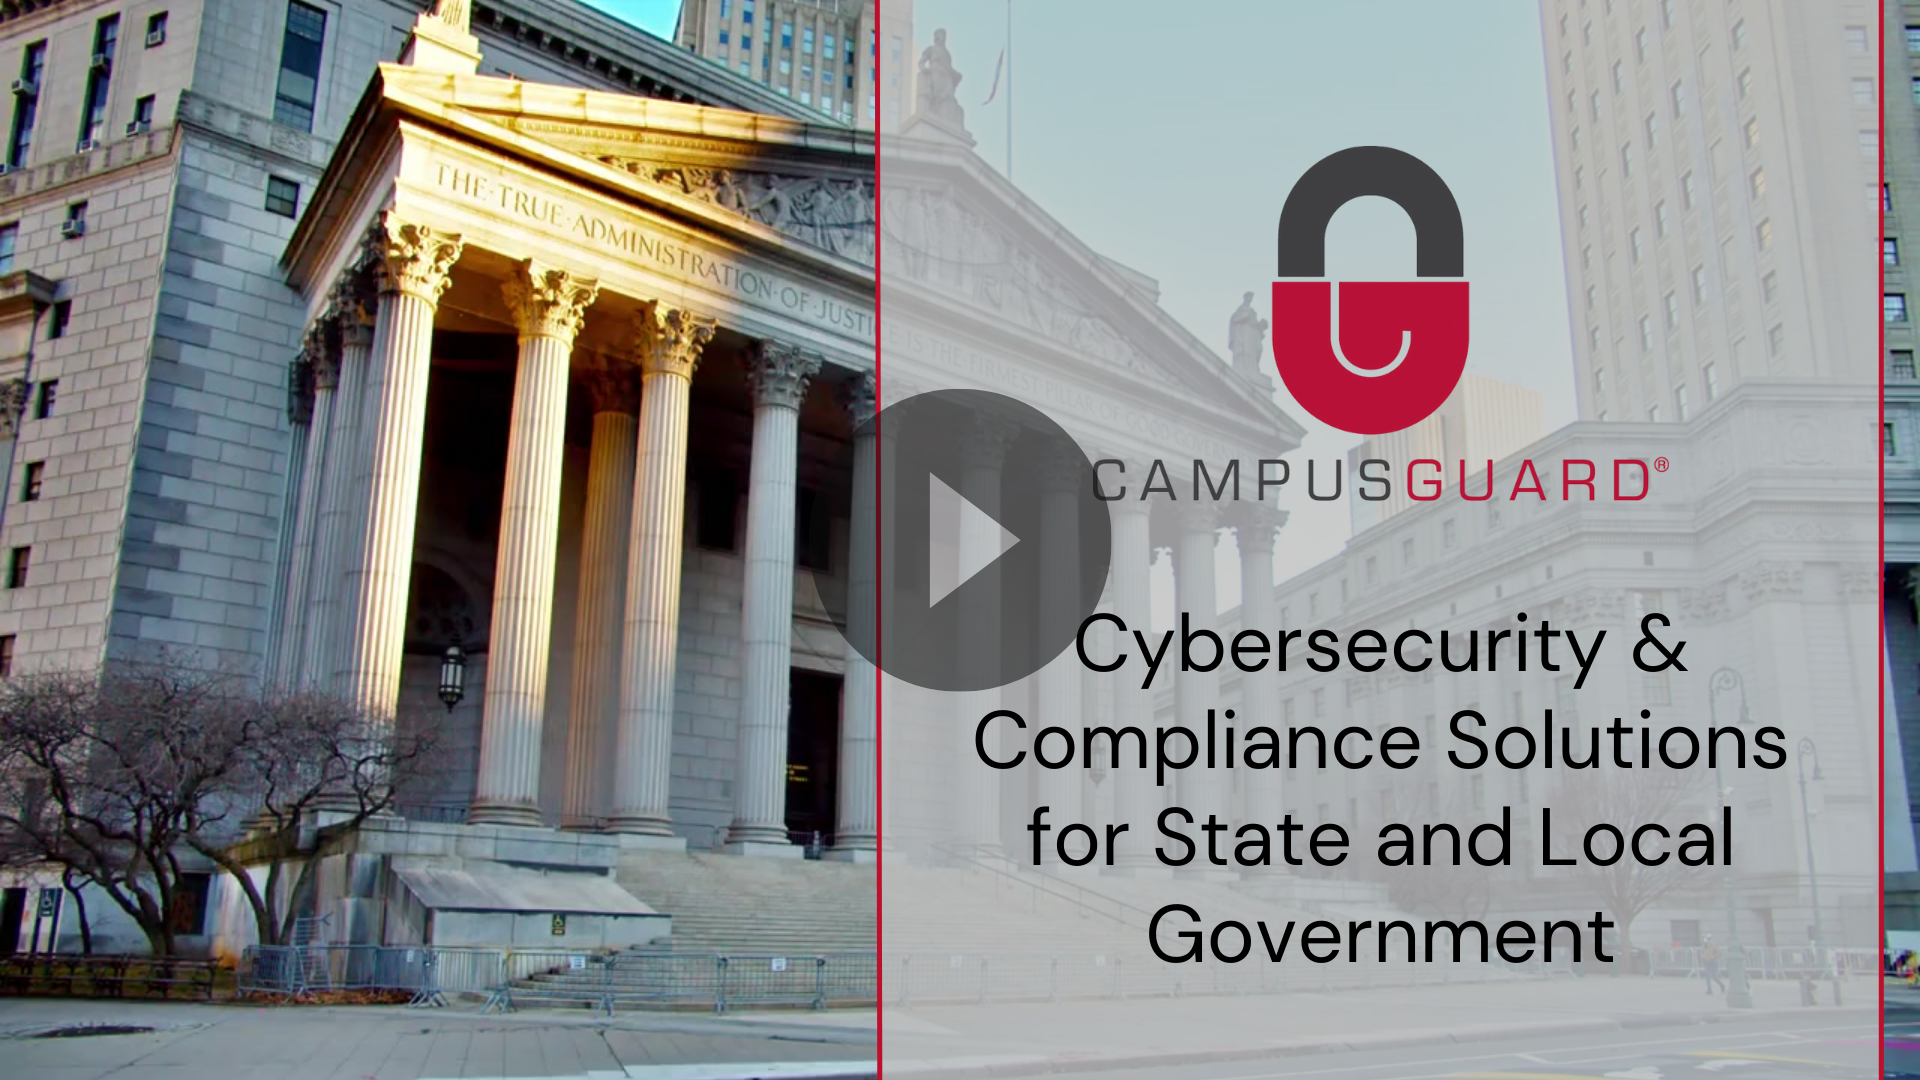 Cybersecurity & Compliance Solutions for State and Local Government video